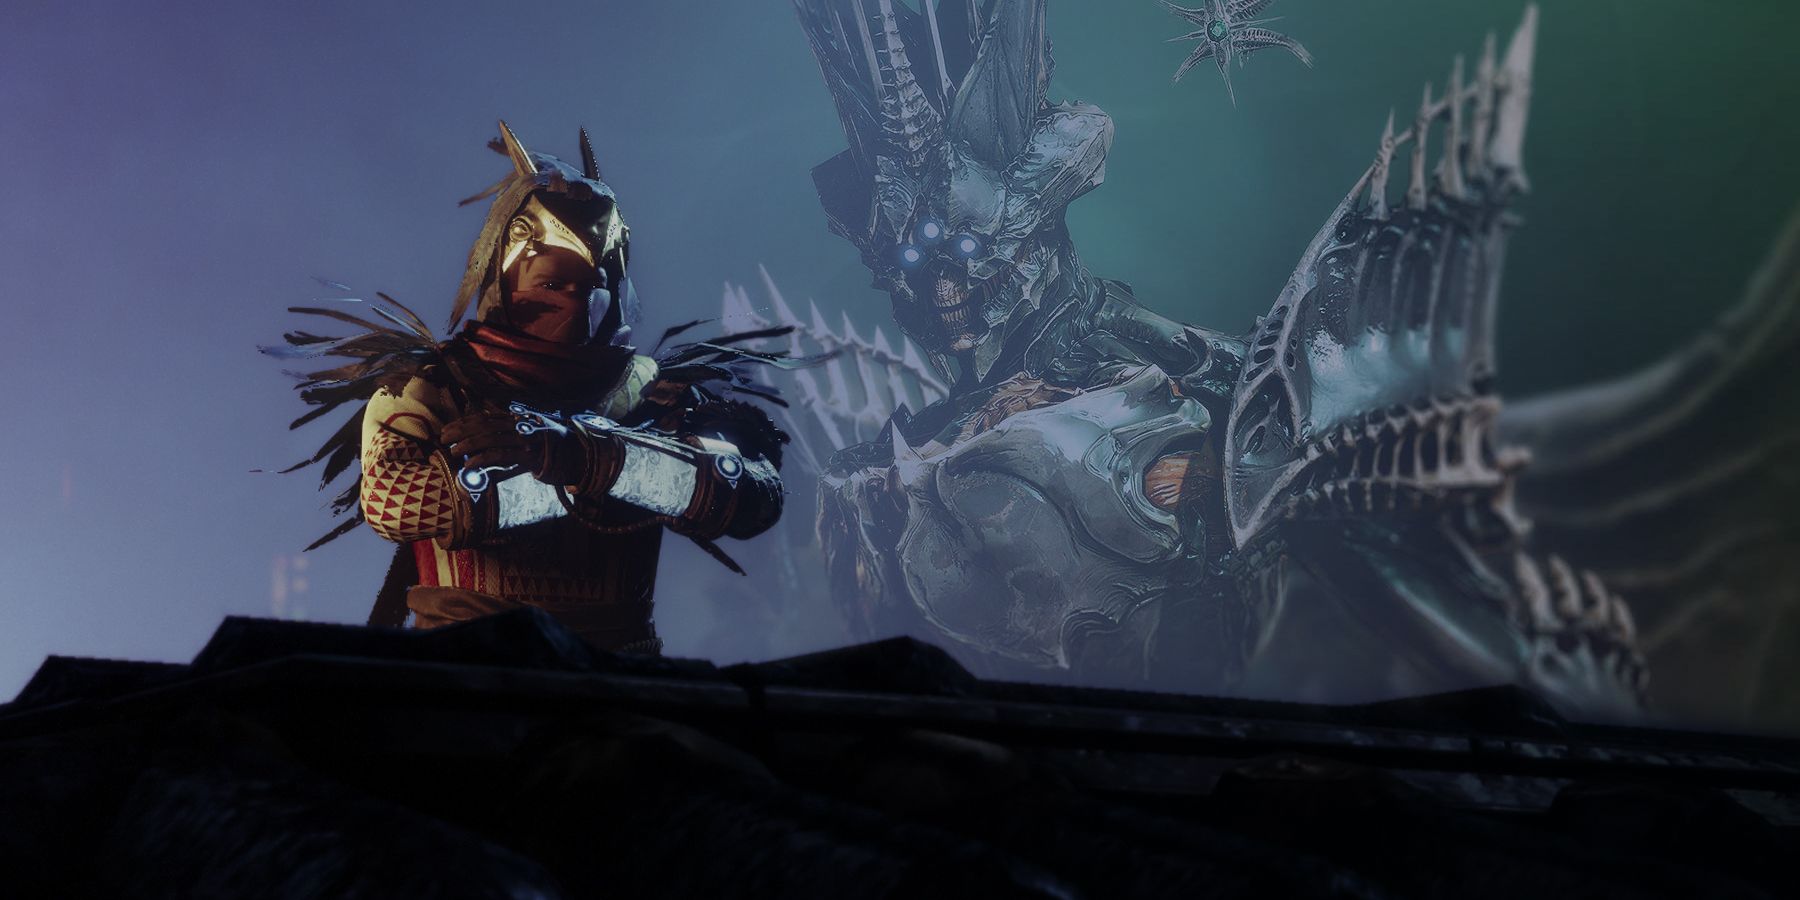 The Warlock Osiris from Destiny 2 on a ledge with the shadowy figure of the Hive Witch Queen, Savathun and her Ghost in the background.